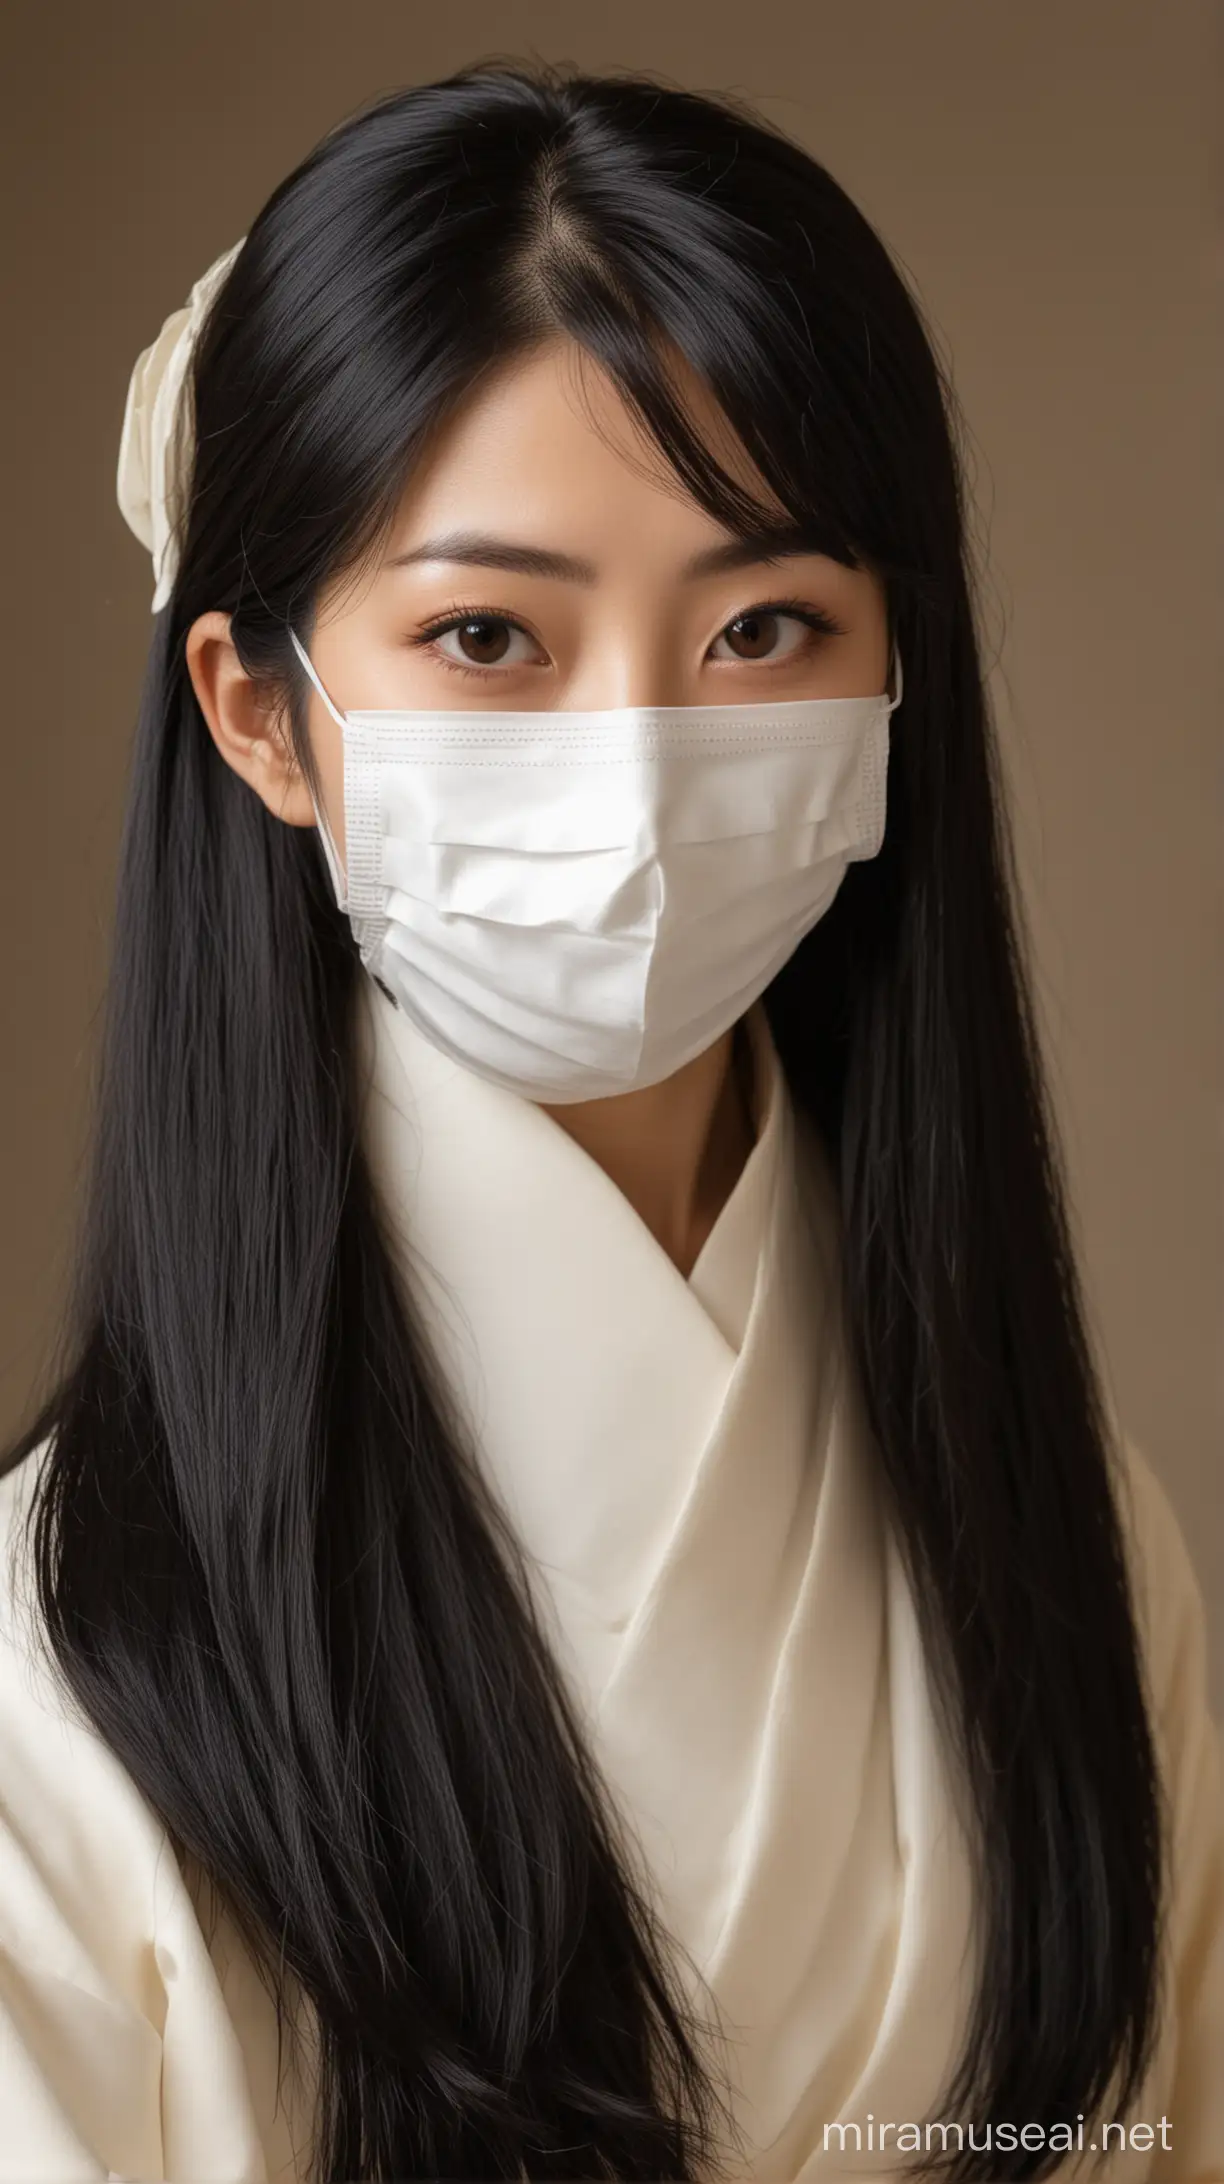 Elegant Japanese Lady in 1970s Court Garb with Protective Mask